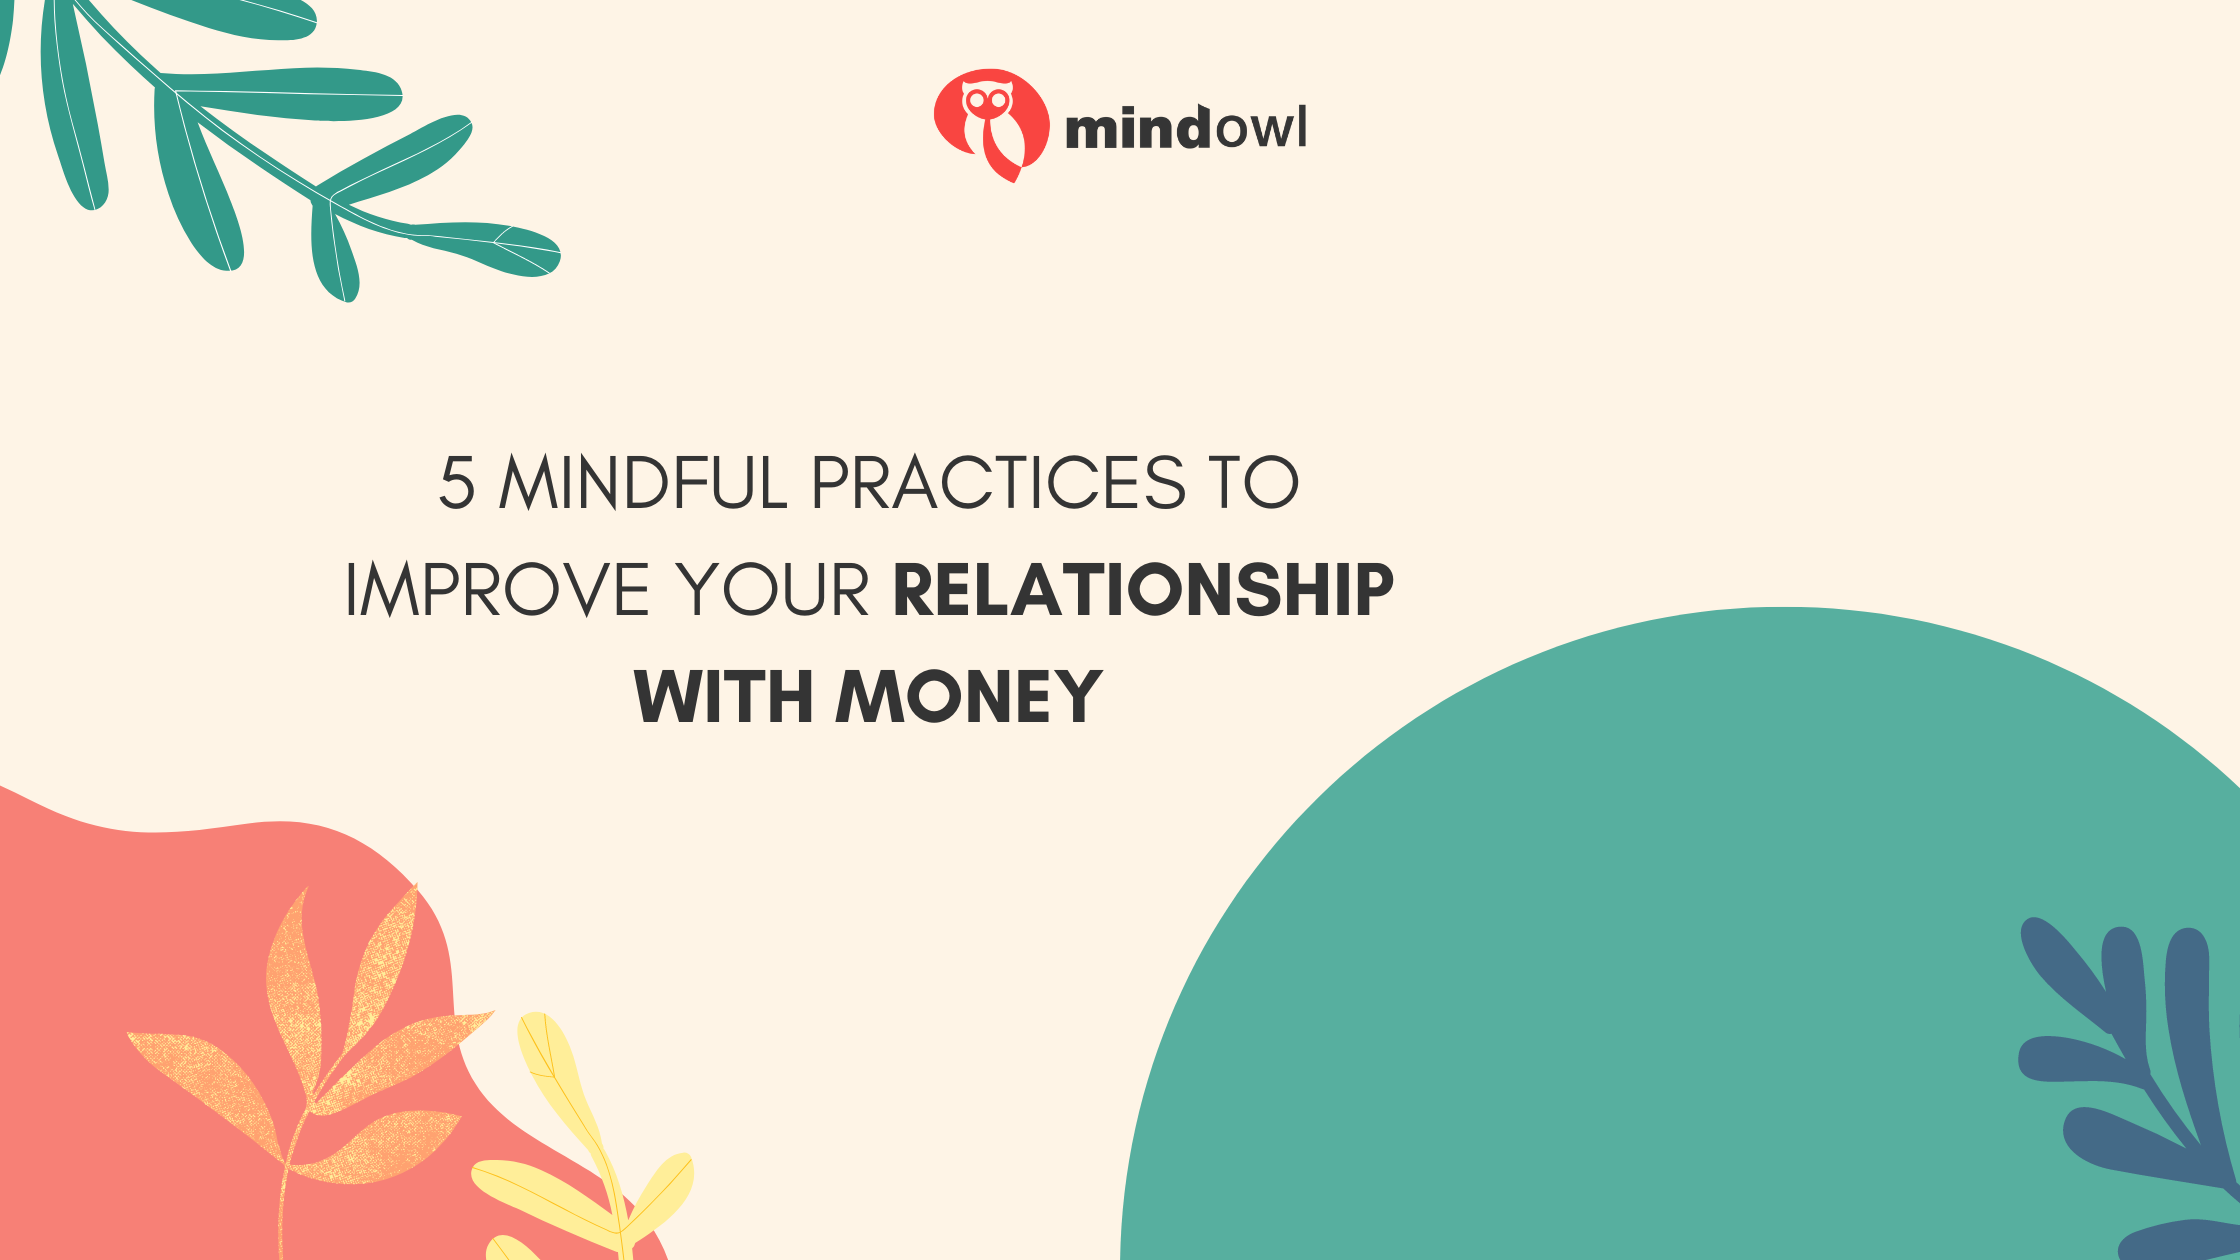 5 Mindful Practices to Improve Your Relationship With Money